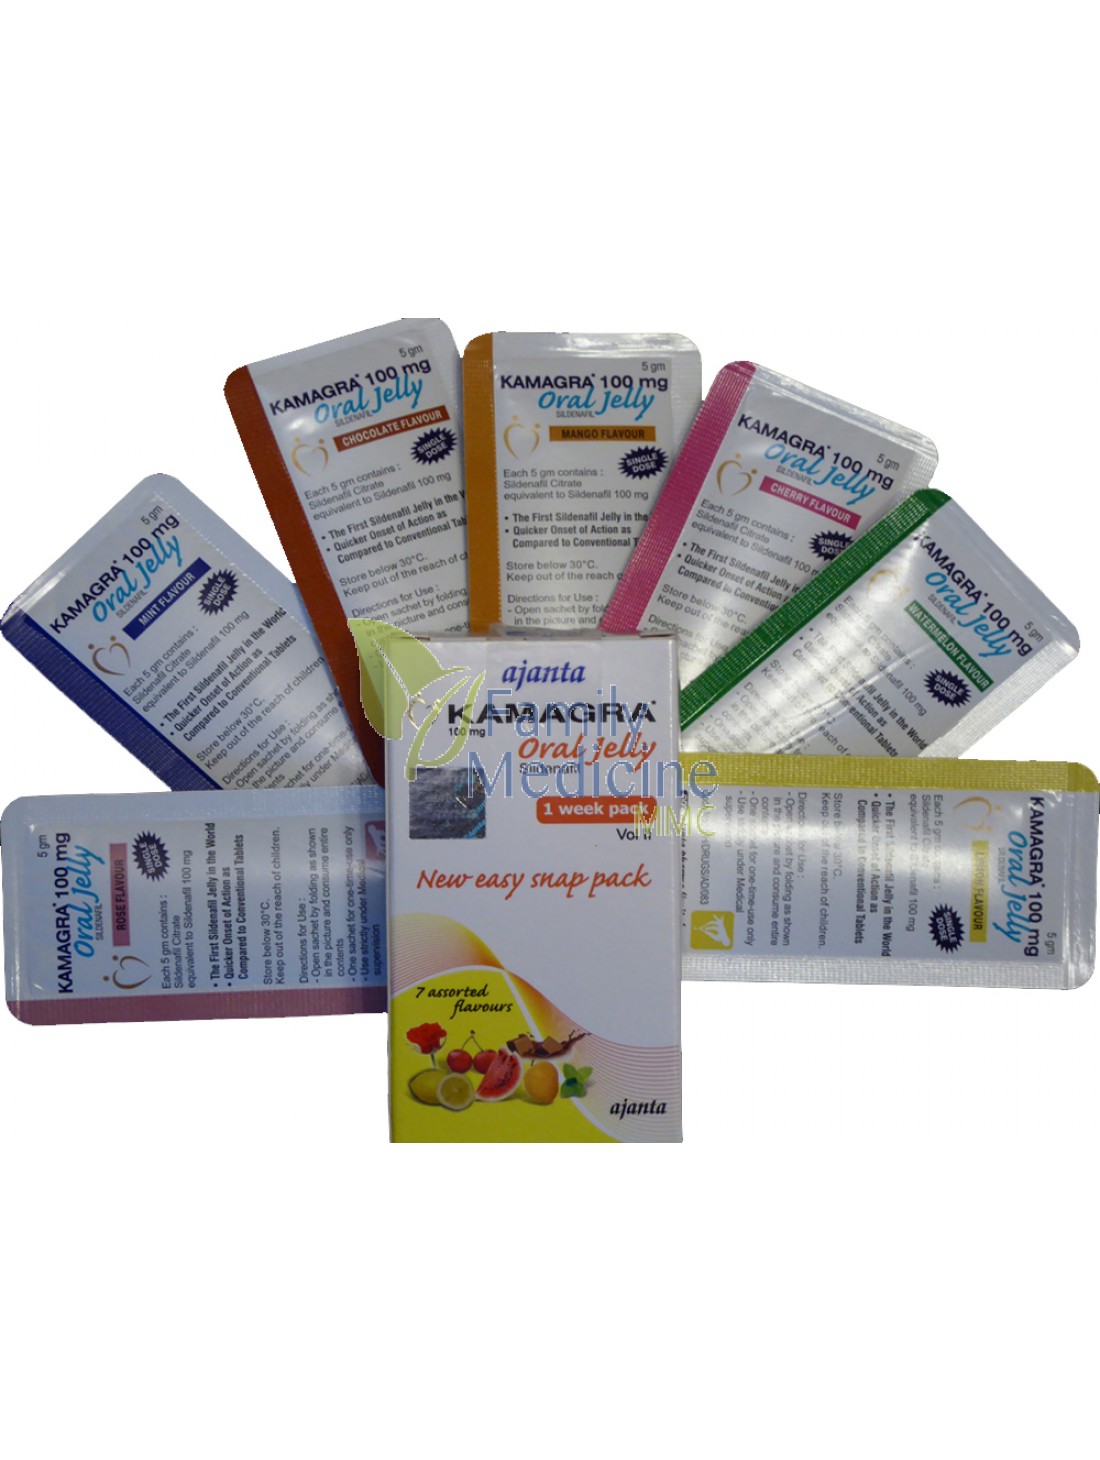 Buy Kamagra Oral Jelly (Sildenafil Citrate) 100mg ...
